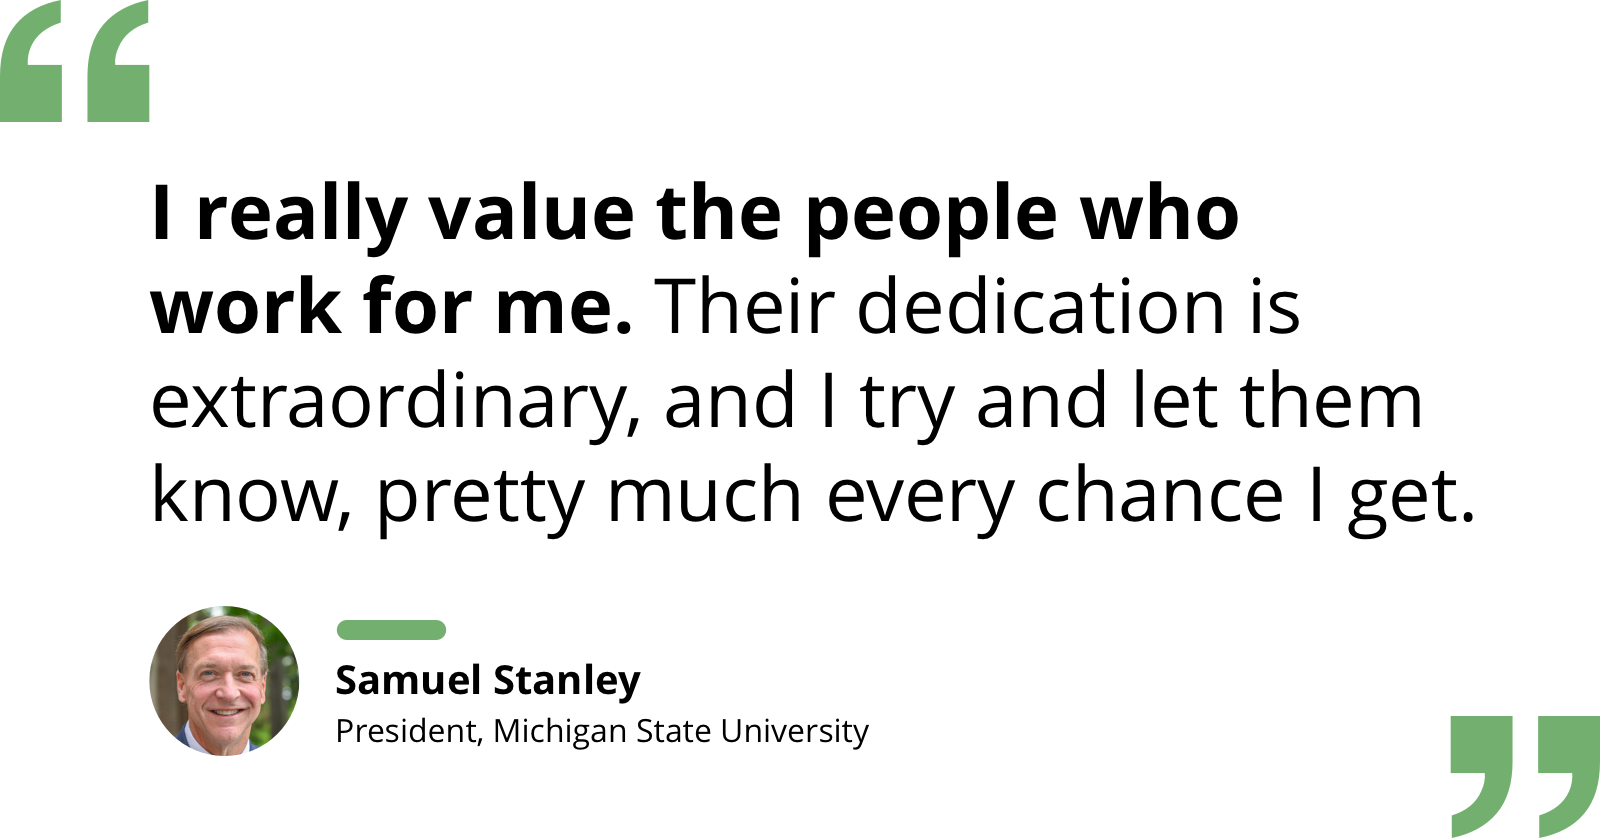 Quote by Samuel Stanley re: valuing the dedicated people who work for him and always letting them know that he does.